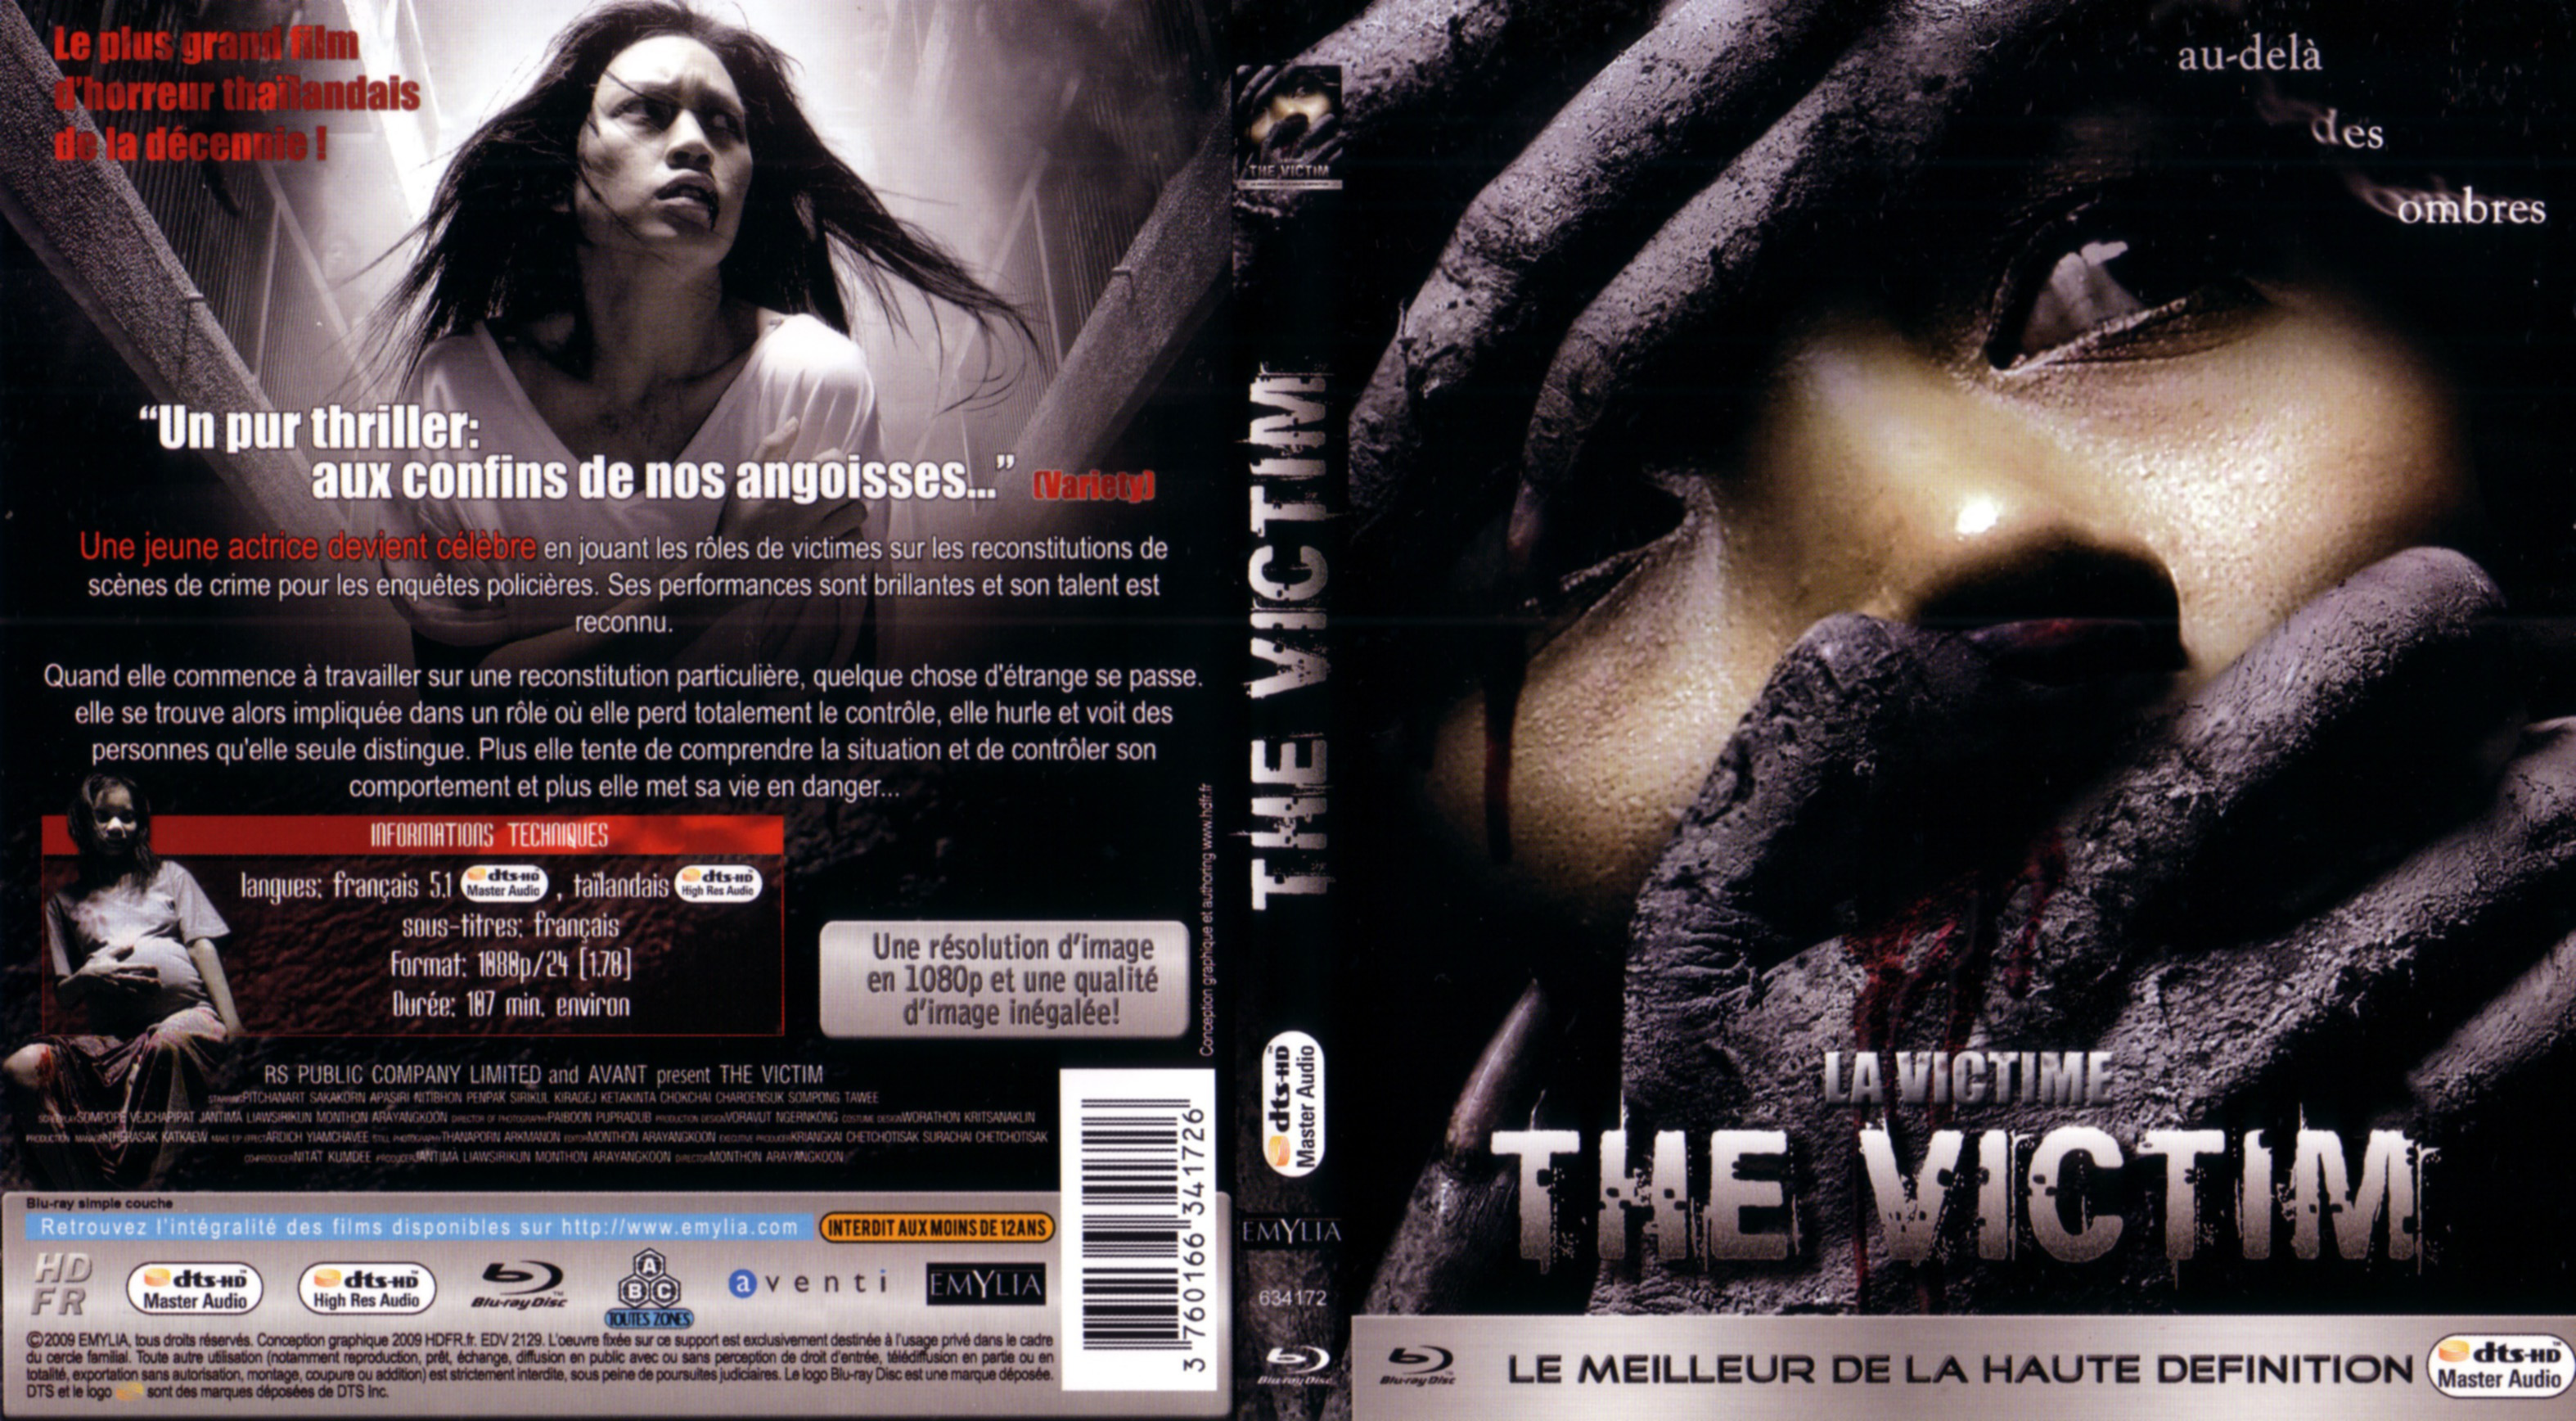 Jaquette DVD The victim (BLU-RAY)